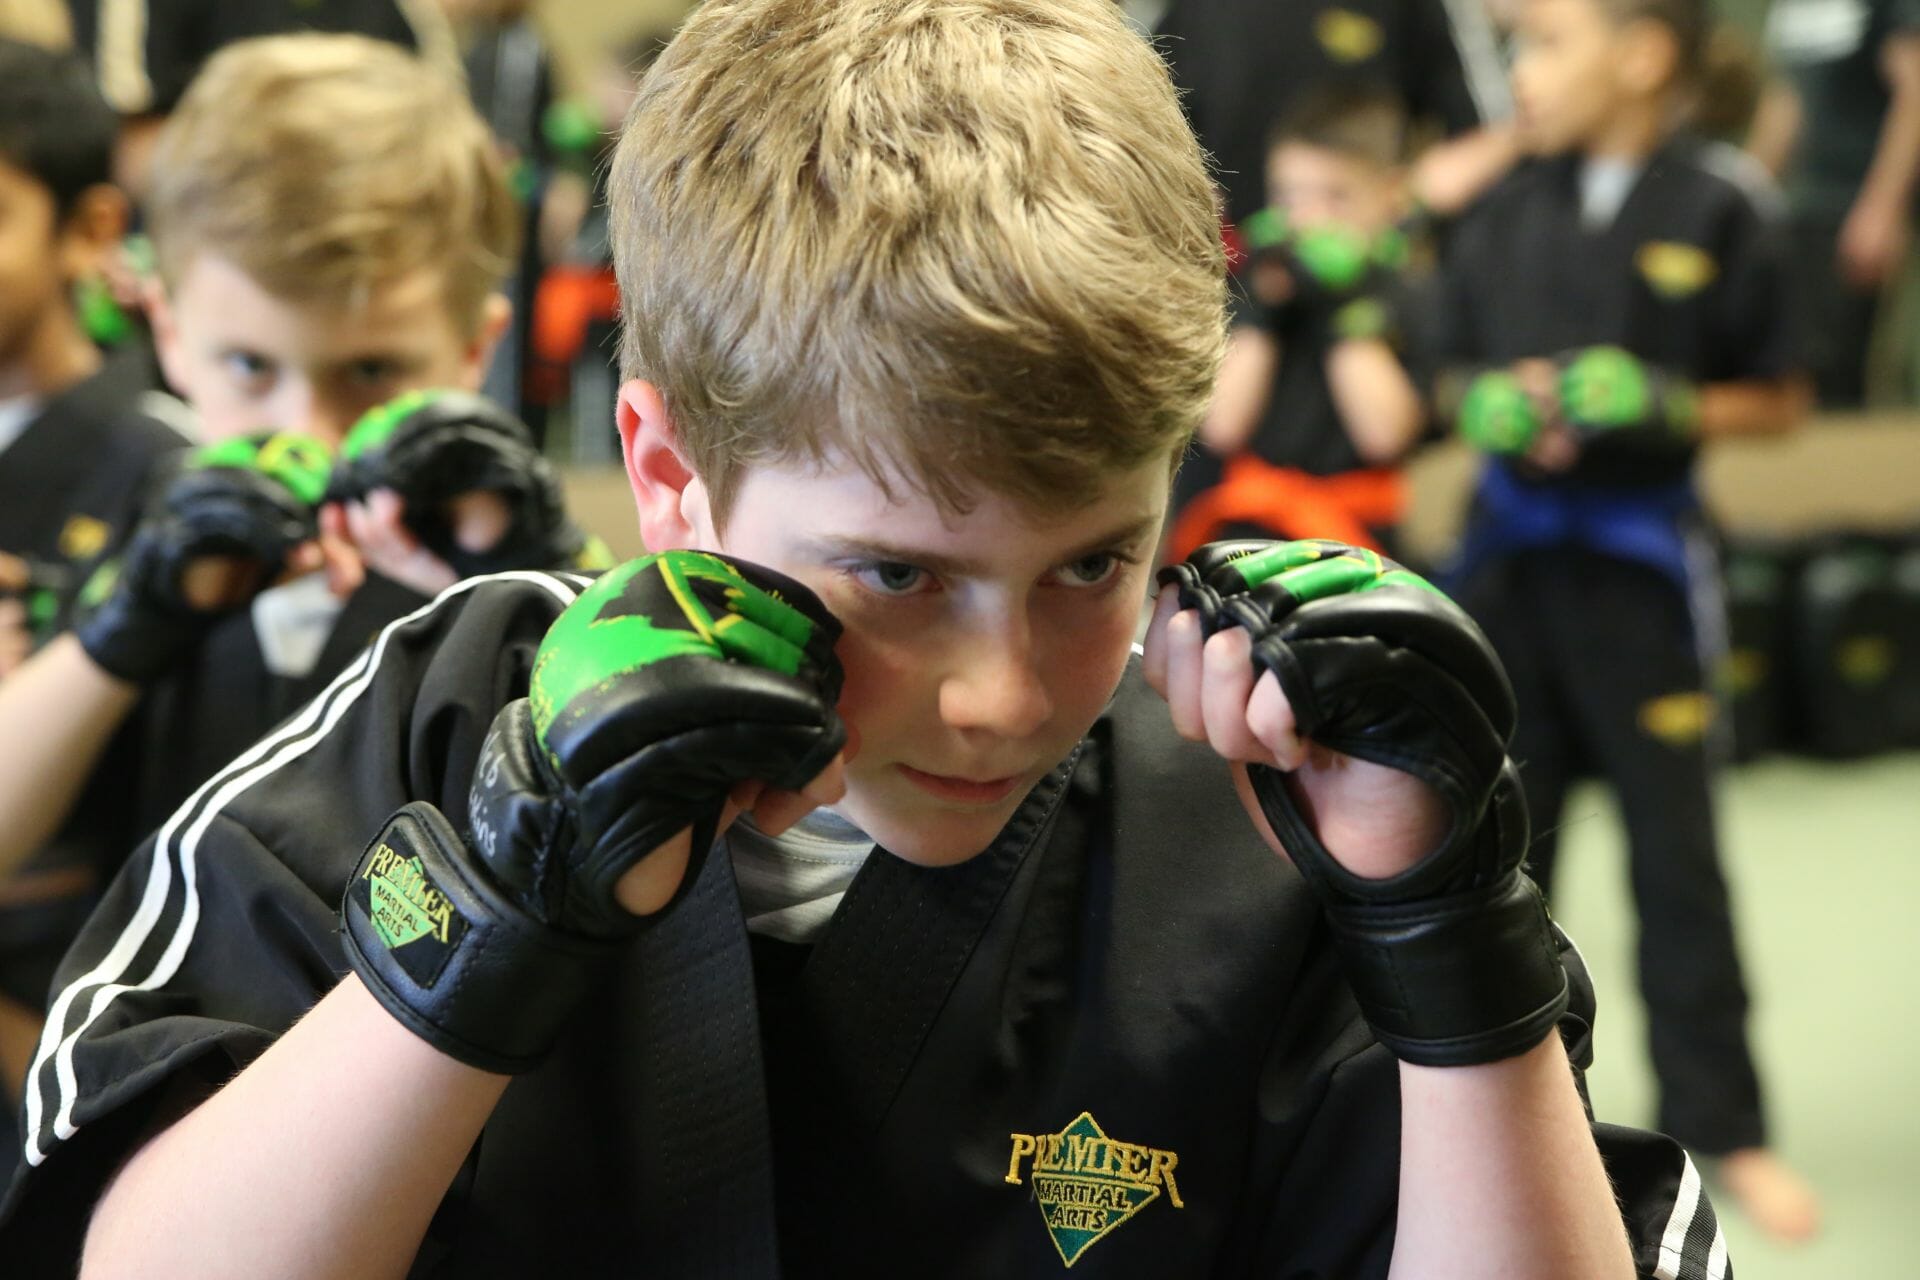 A boy with a determined looks practices at Premier Martial Arts